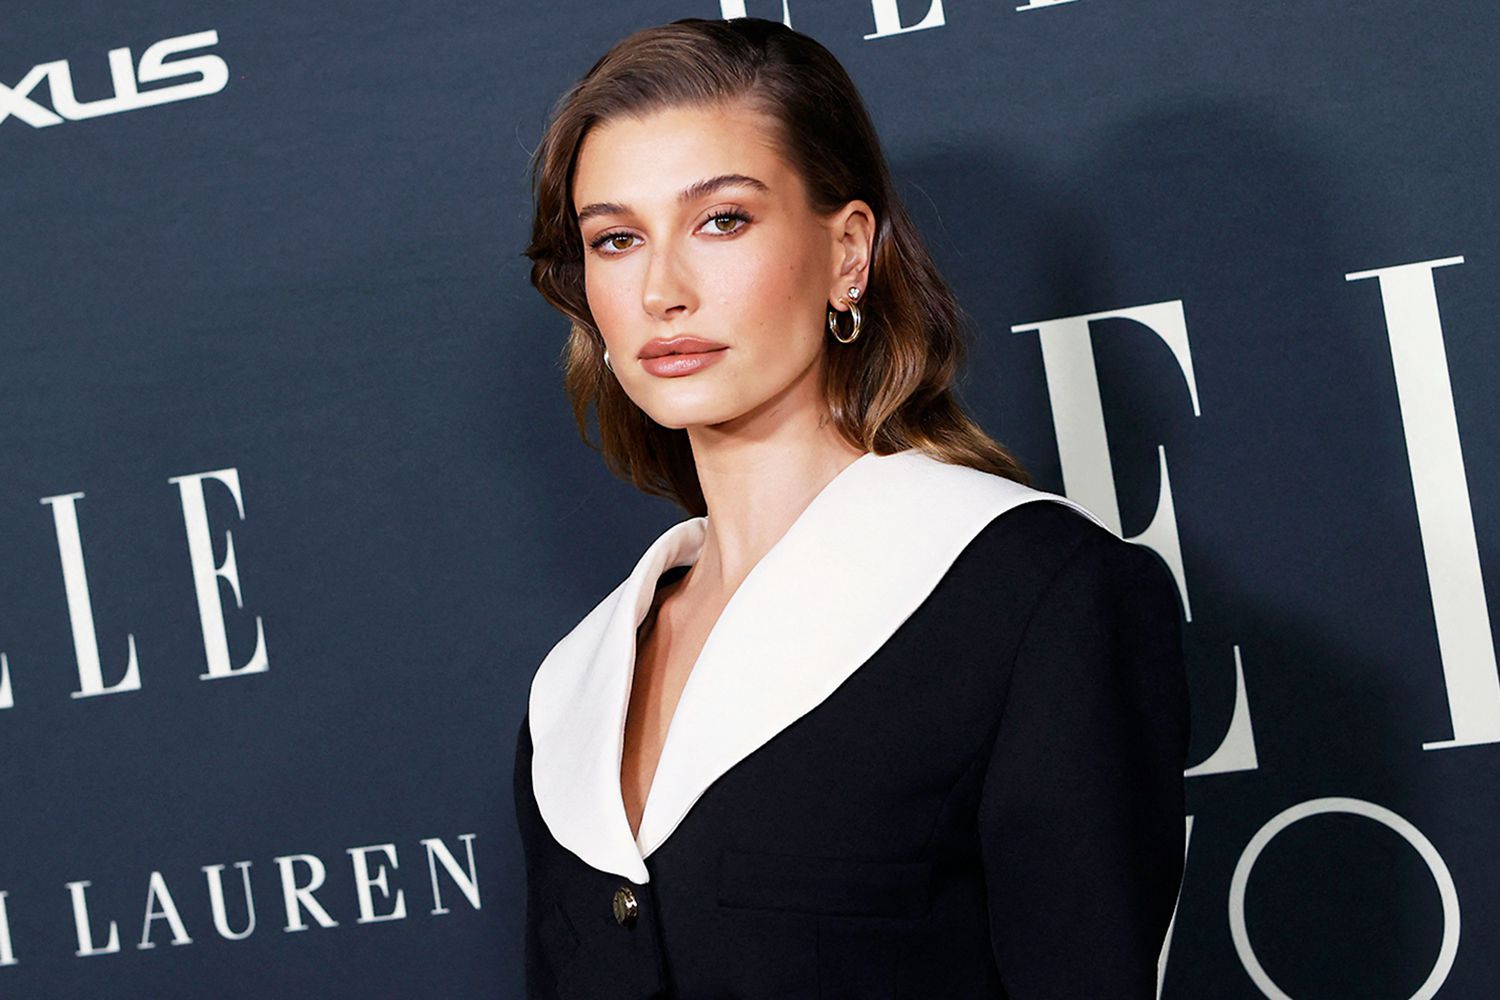 Hailey Bieber Shares Reaction to Roe v. Wade Reversal: ‘What an Extreme Loss’